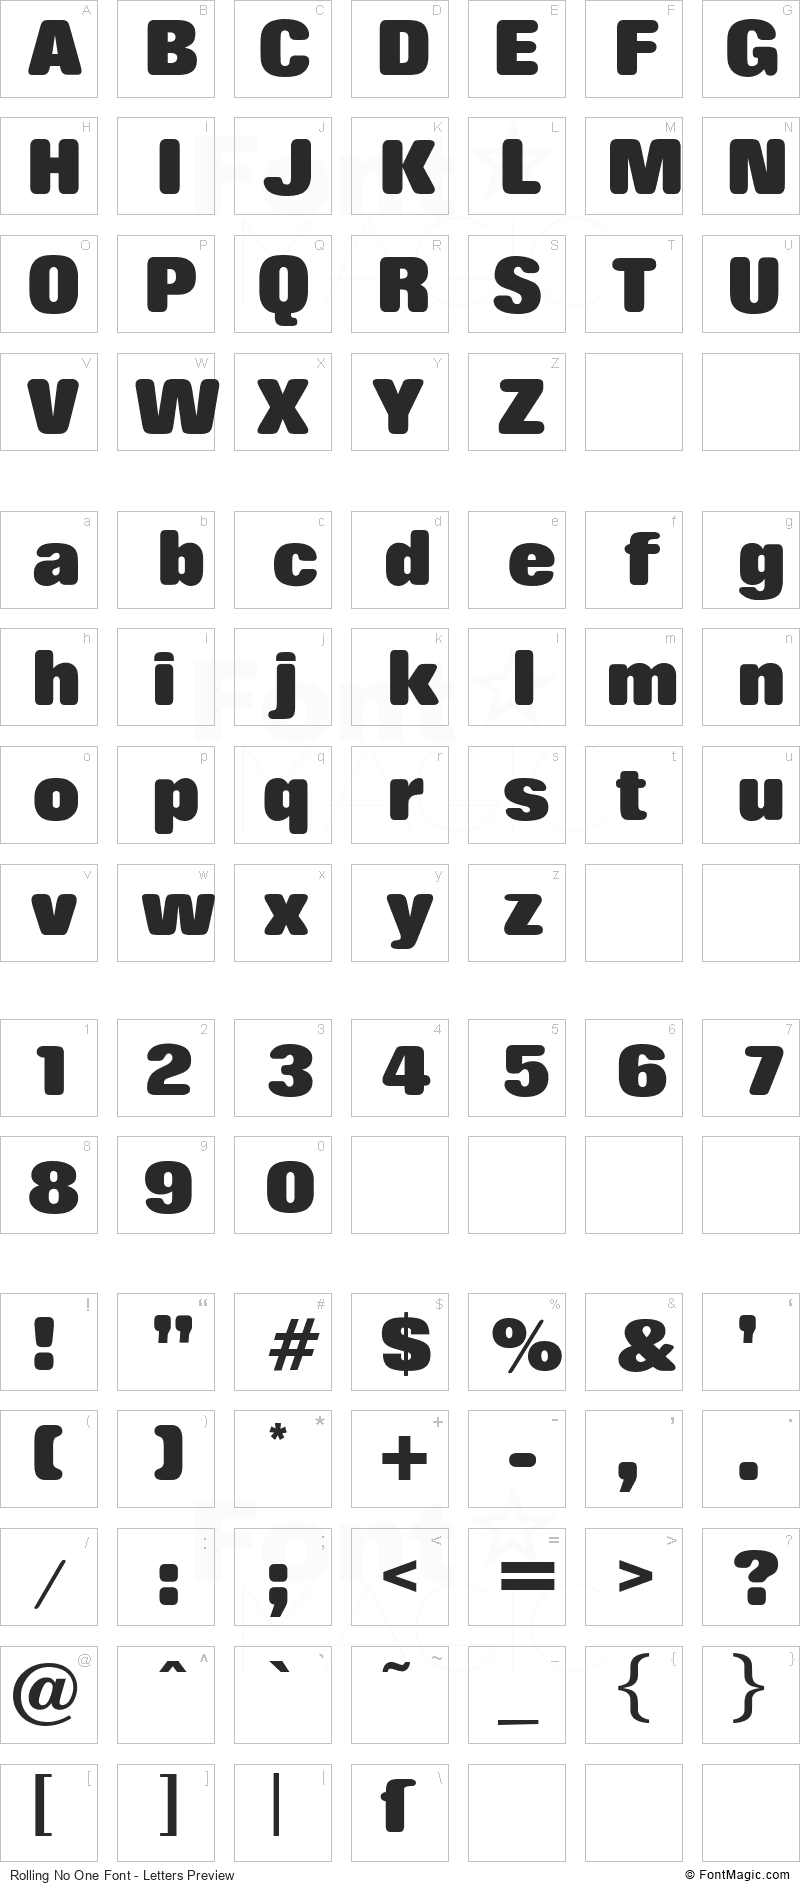 Rolling No One Font - All Latters Preview Chart